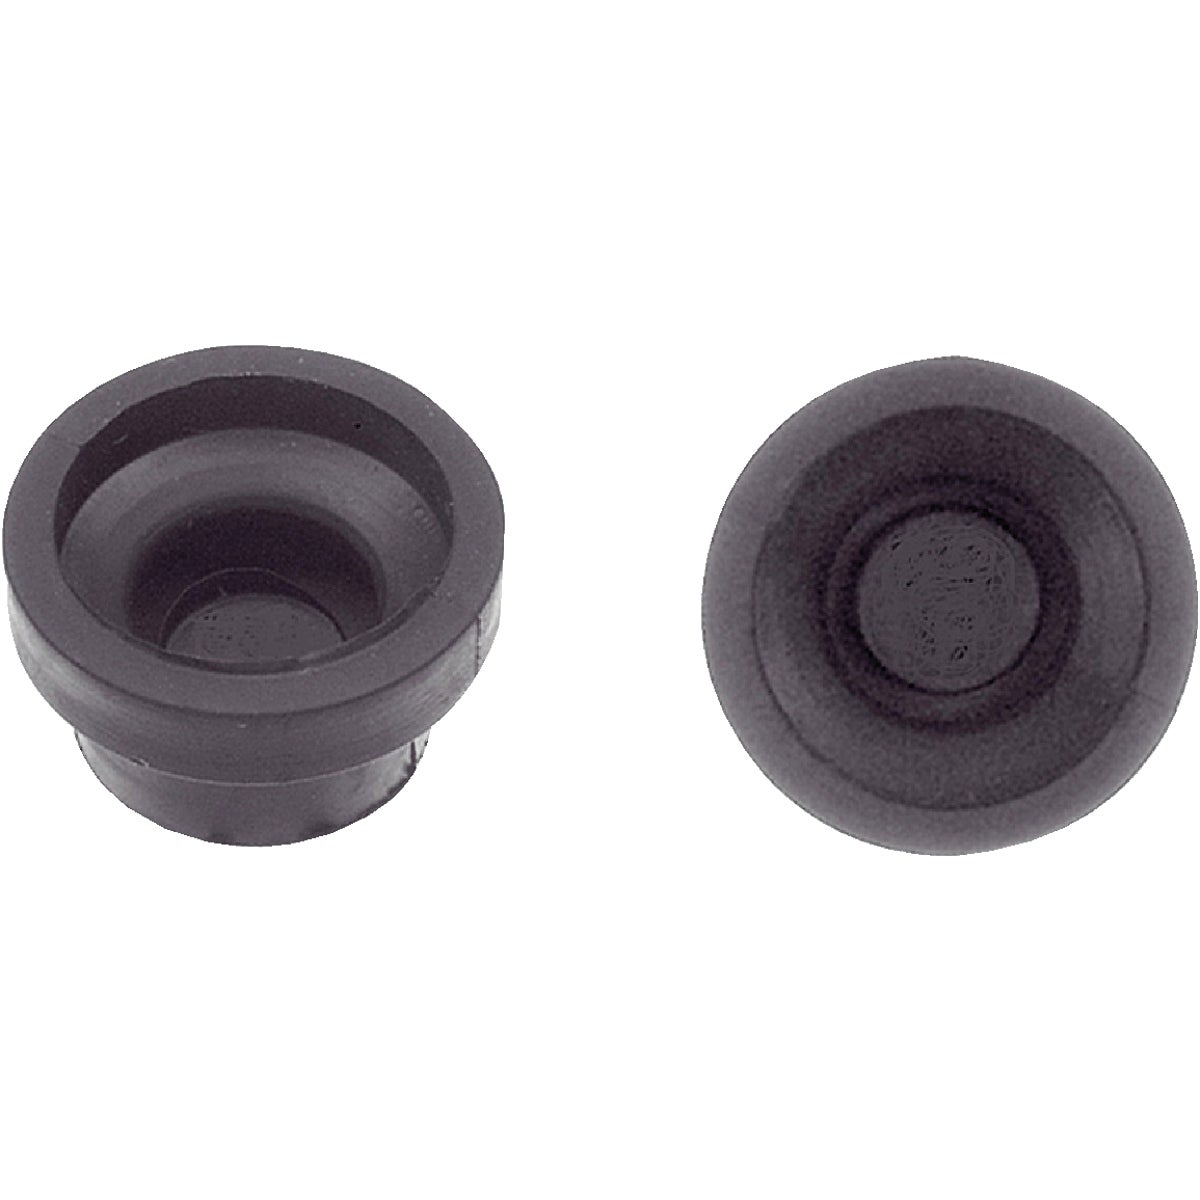 Item 494488, Aquaseal diaphragm faucet washer for American Standard faucets